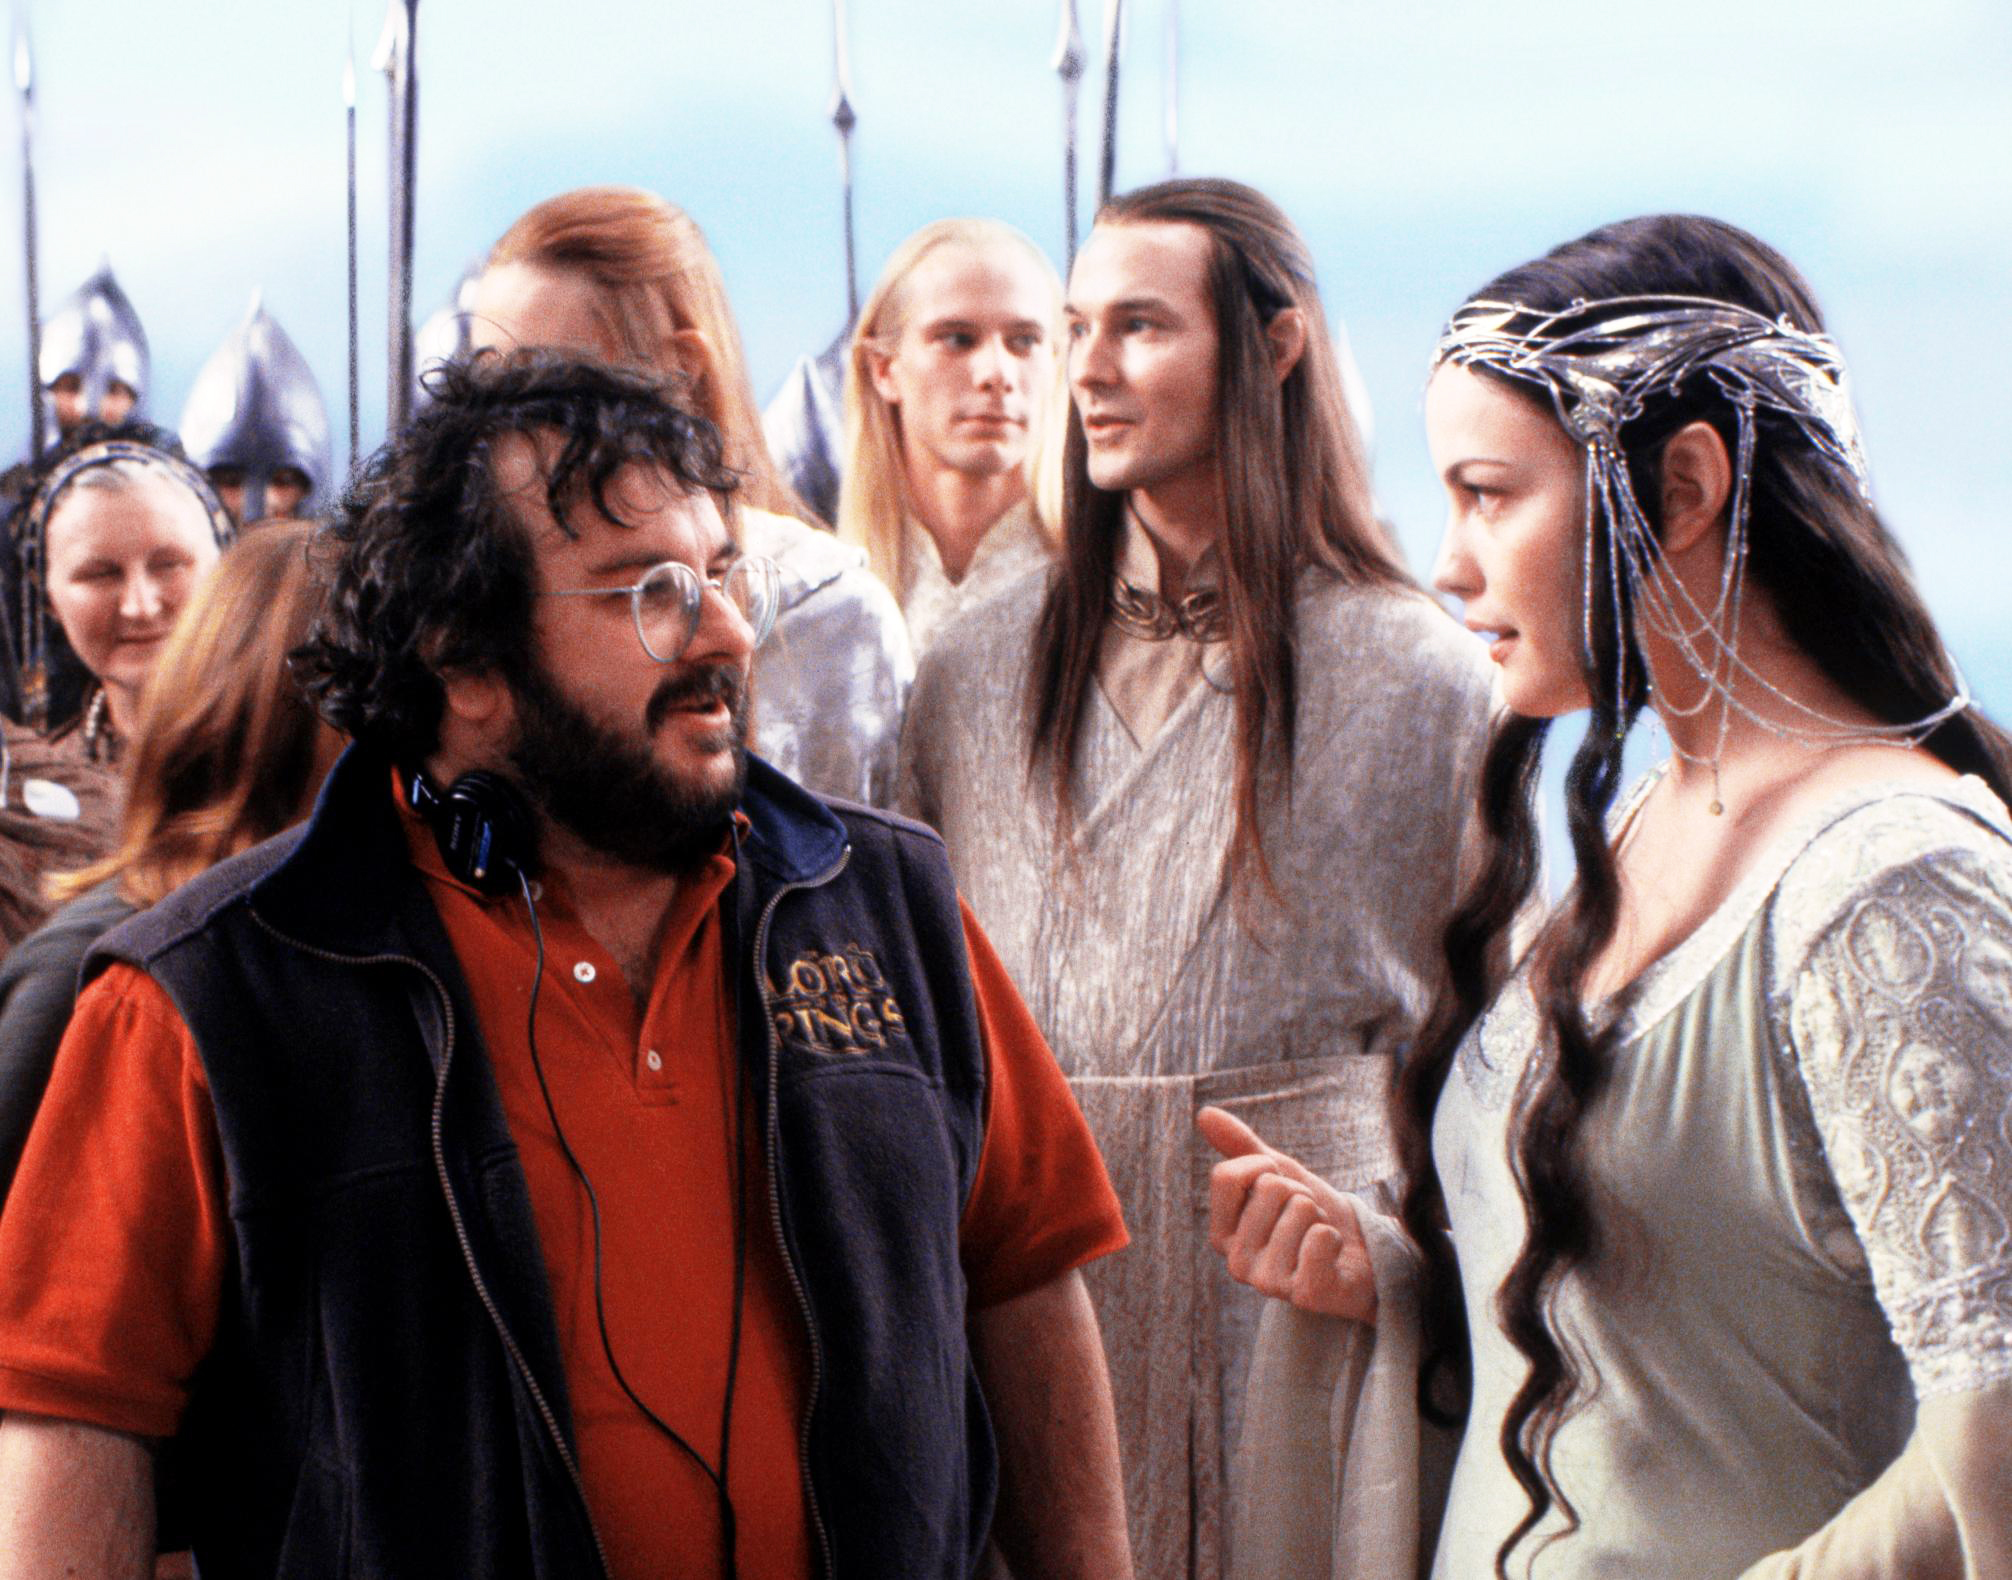 Peter Jackson and Liv Tyler filming The Lord of the Rings: The Return of the King.